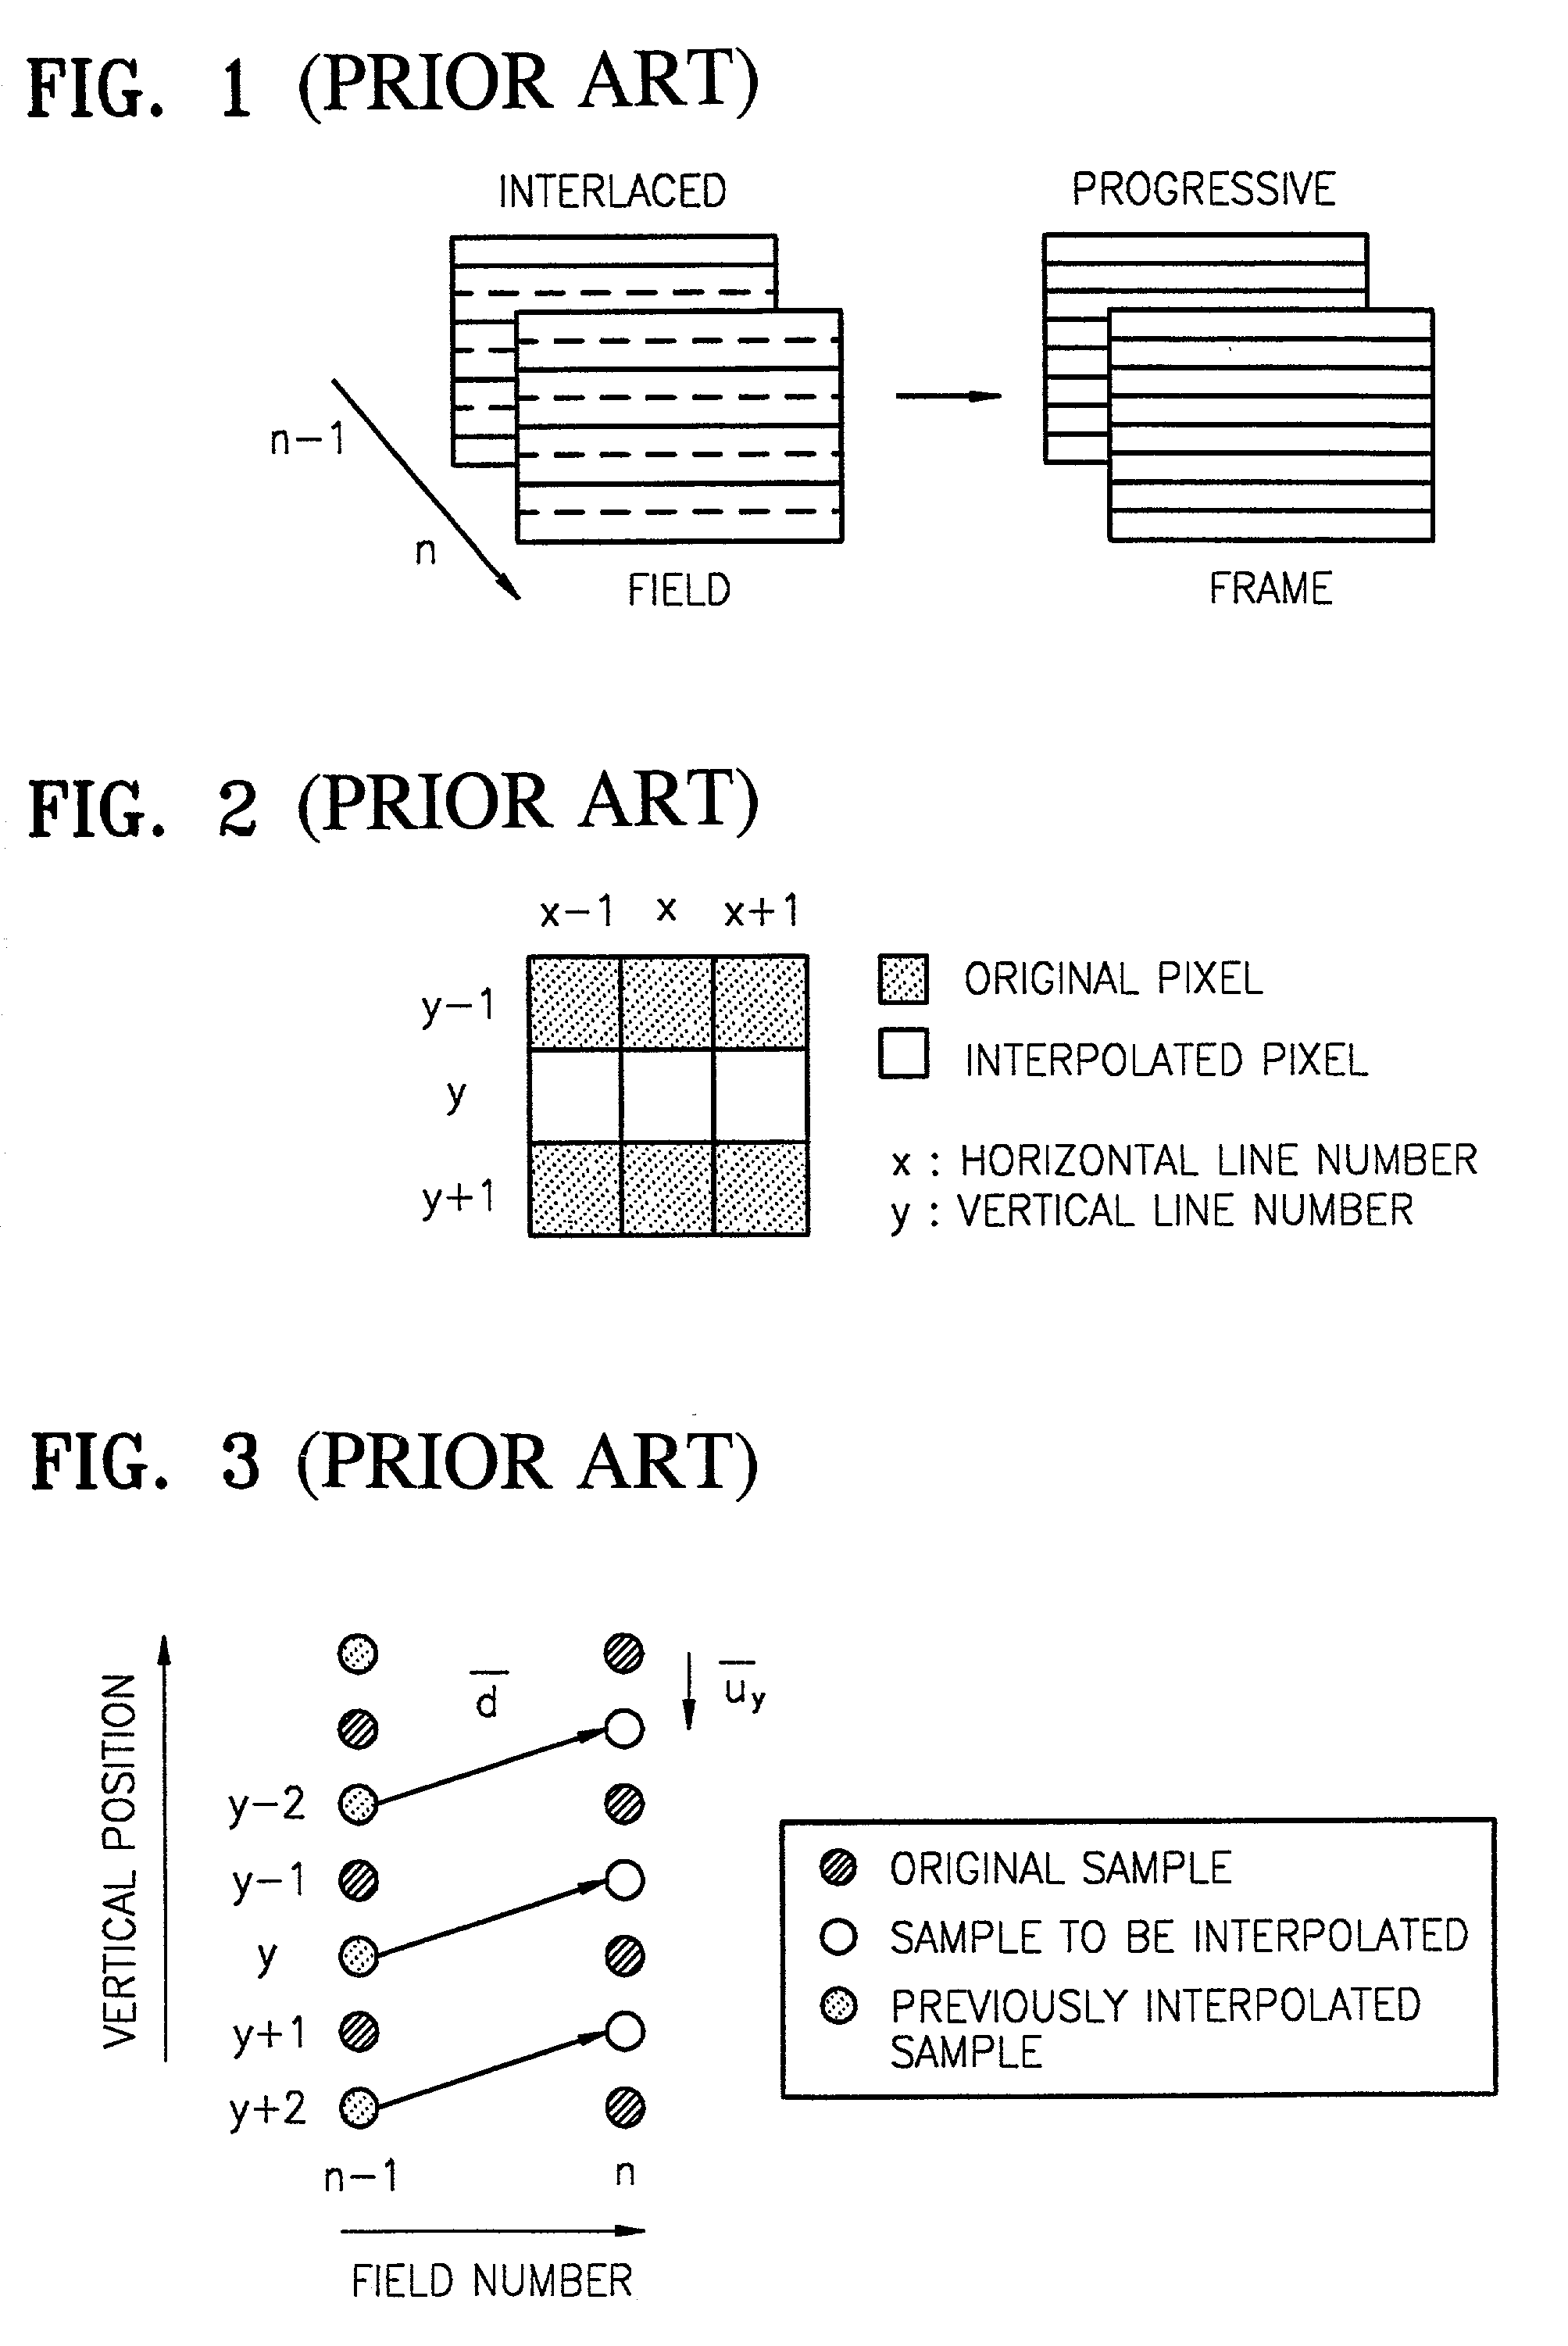 Apparatus and method for adaptive motion compensated de-interlacing of video data